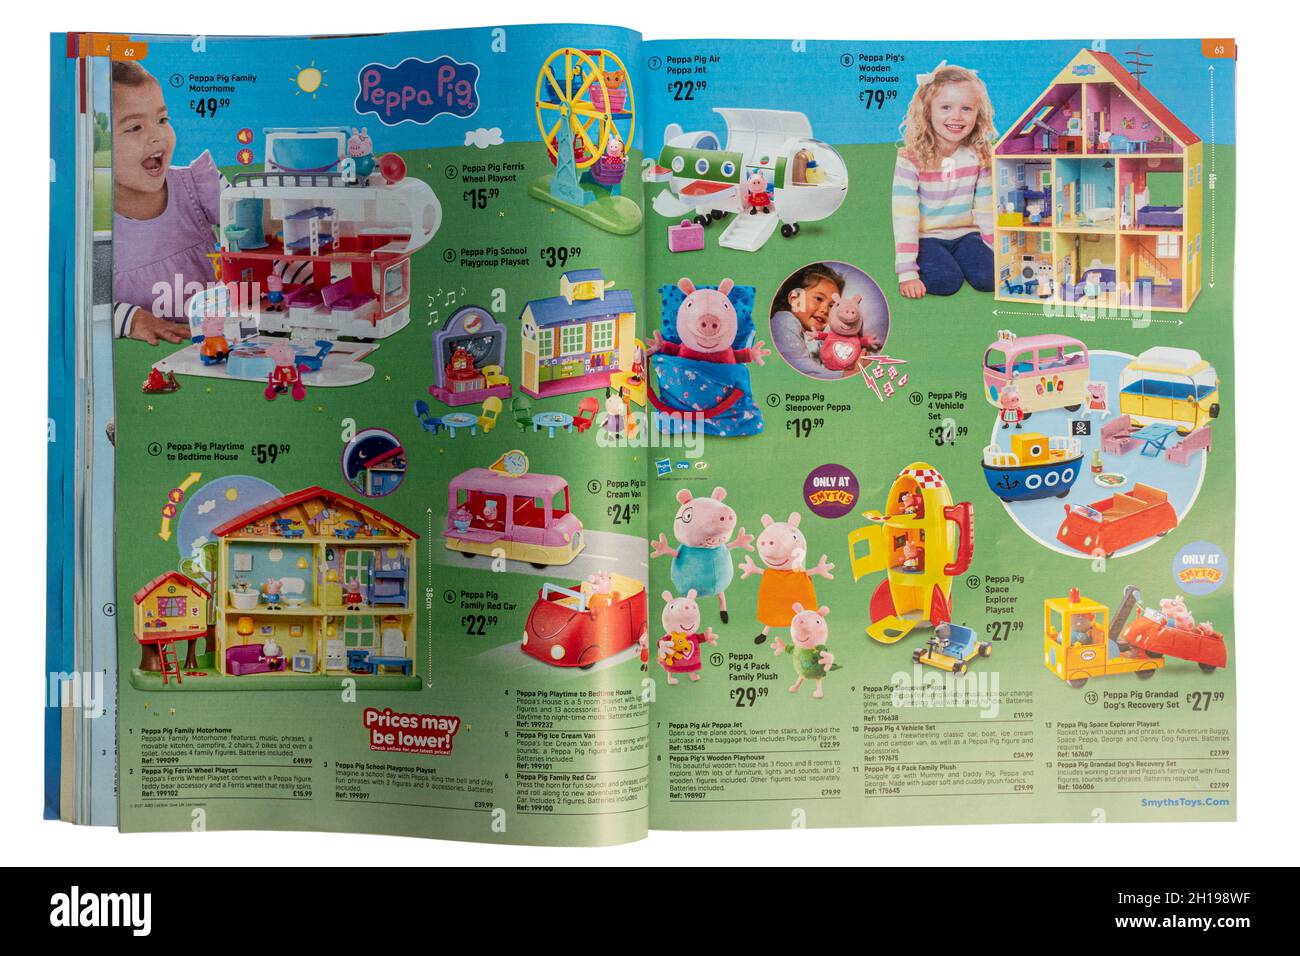 There are concerns about availability of toys for Christmas presents due to transport problems. Pictured: Smyths Toys catalogue, winter 2021, UK. Stock Photo